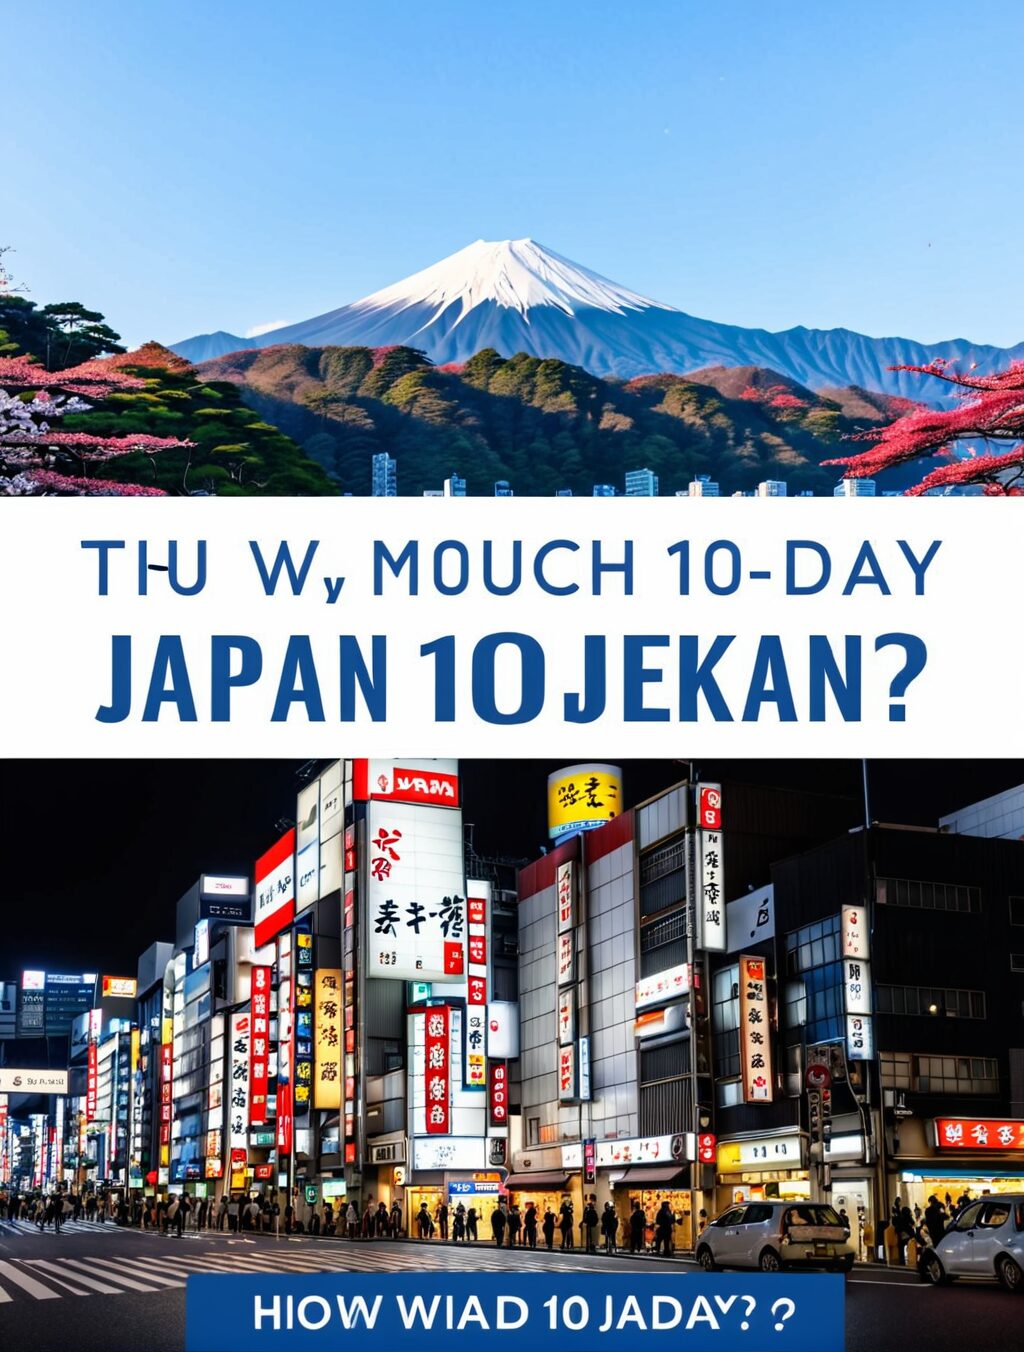 how much would a 10 day trip to japan cost